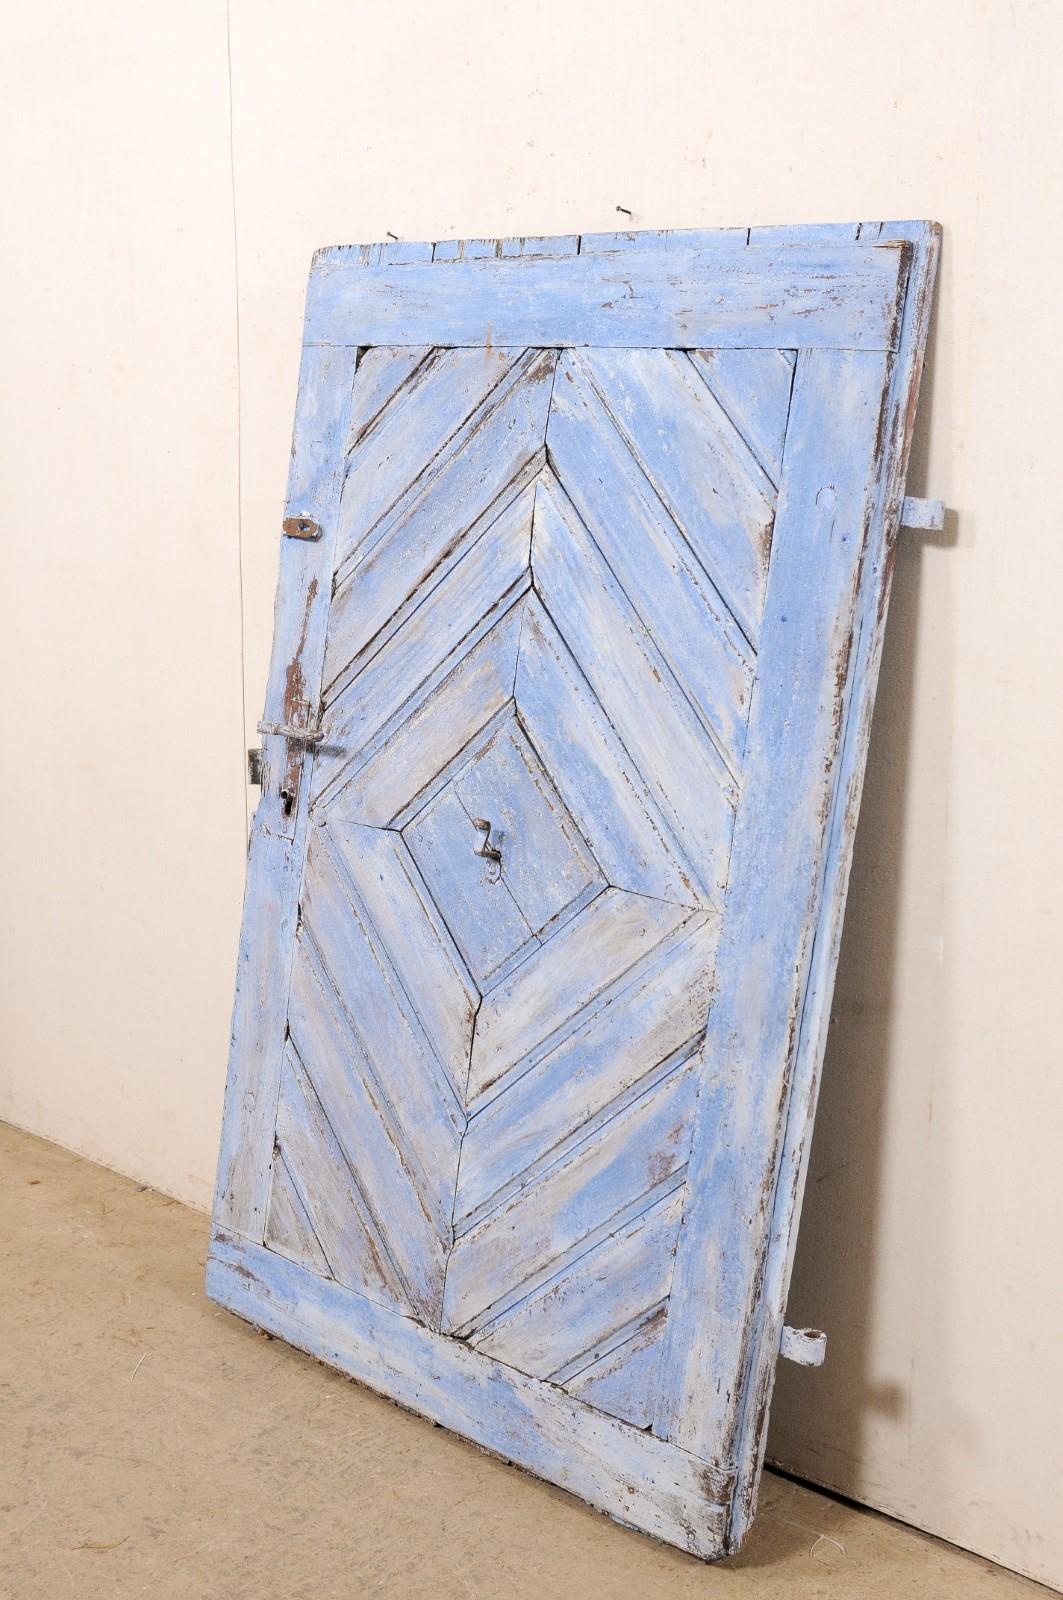 19th Century Spanish 19th C. Diamond Pattern Painted Wood Door 'Could be a Great Headboard' For Sale